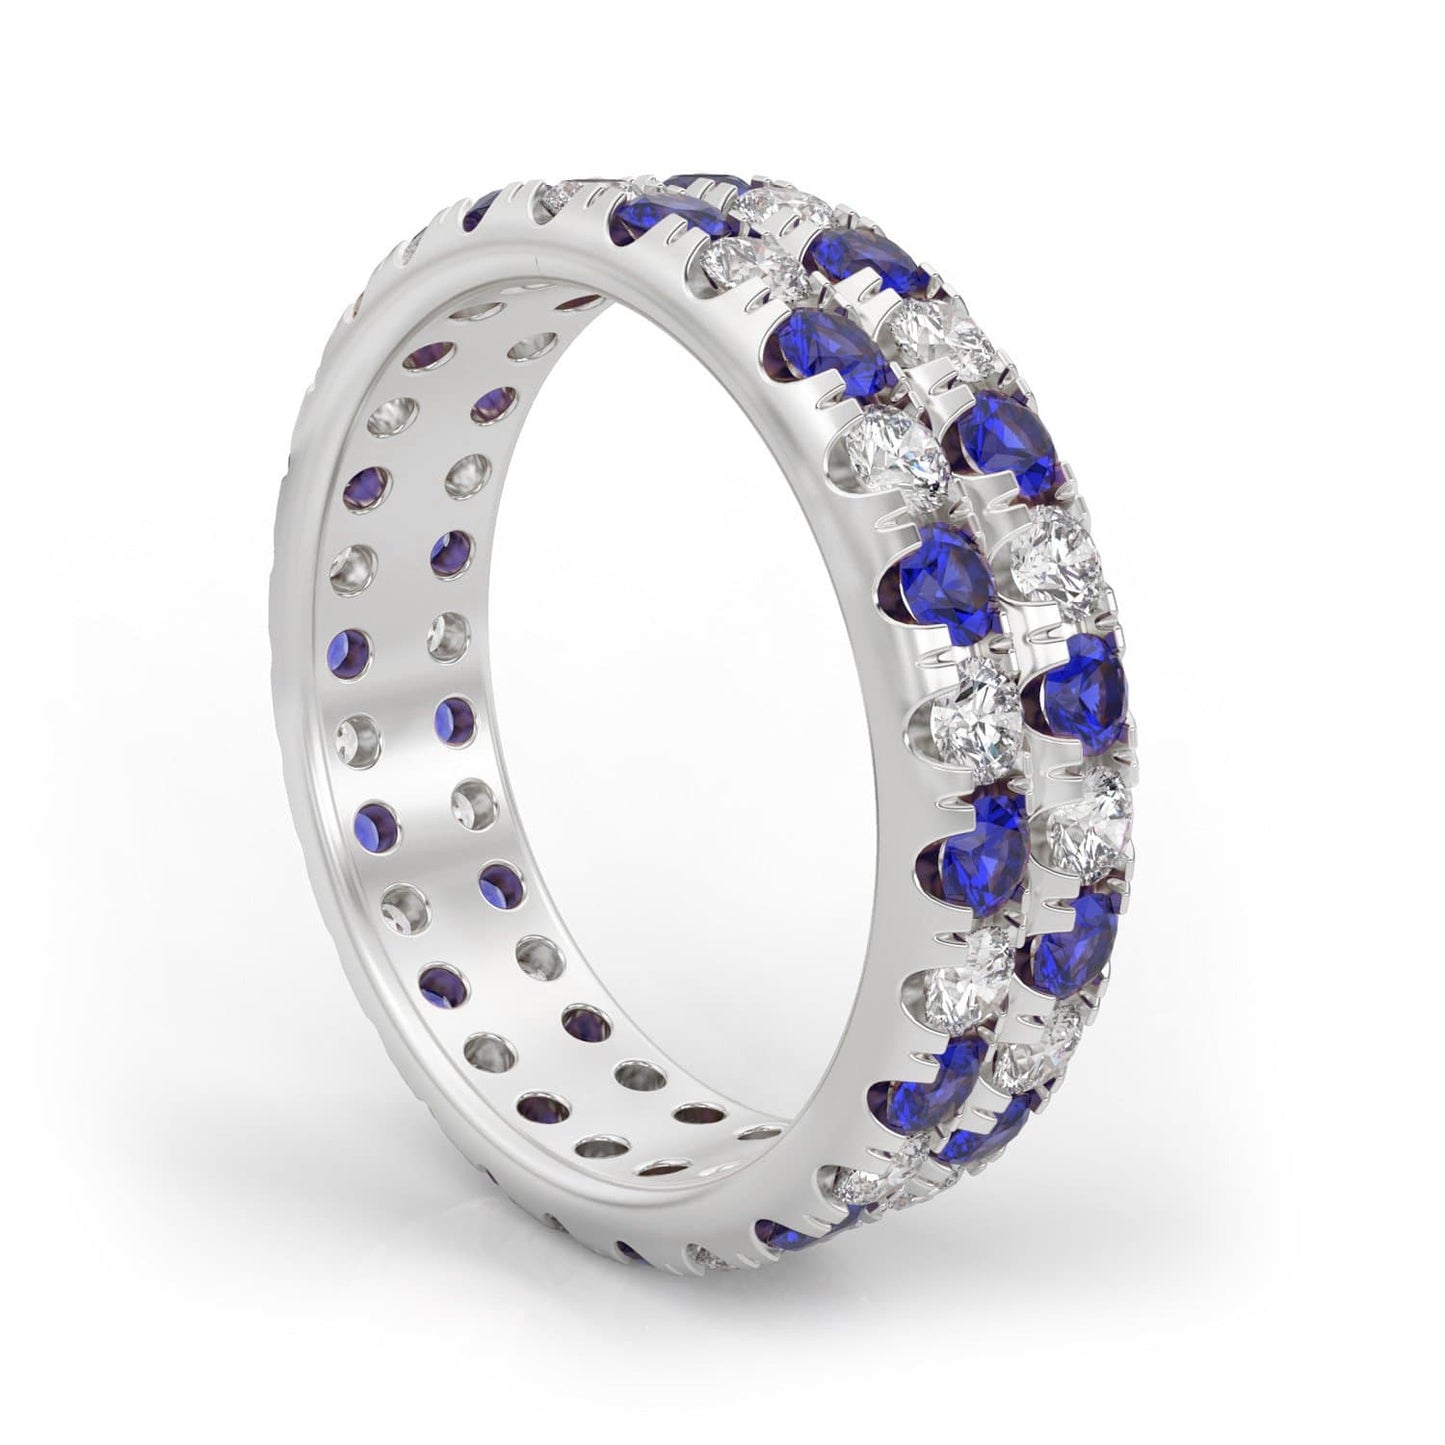 2ct Two-Row Diamond & Sapphire Eternity Ring in 14k Gold